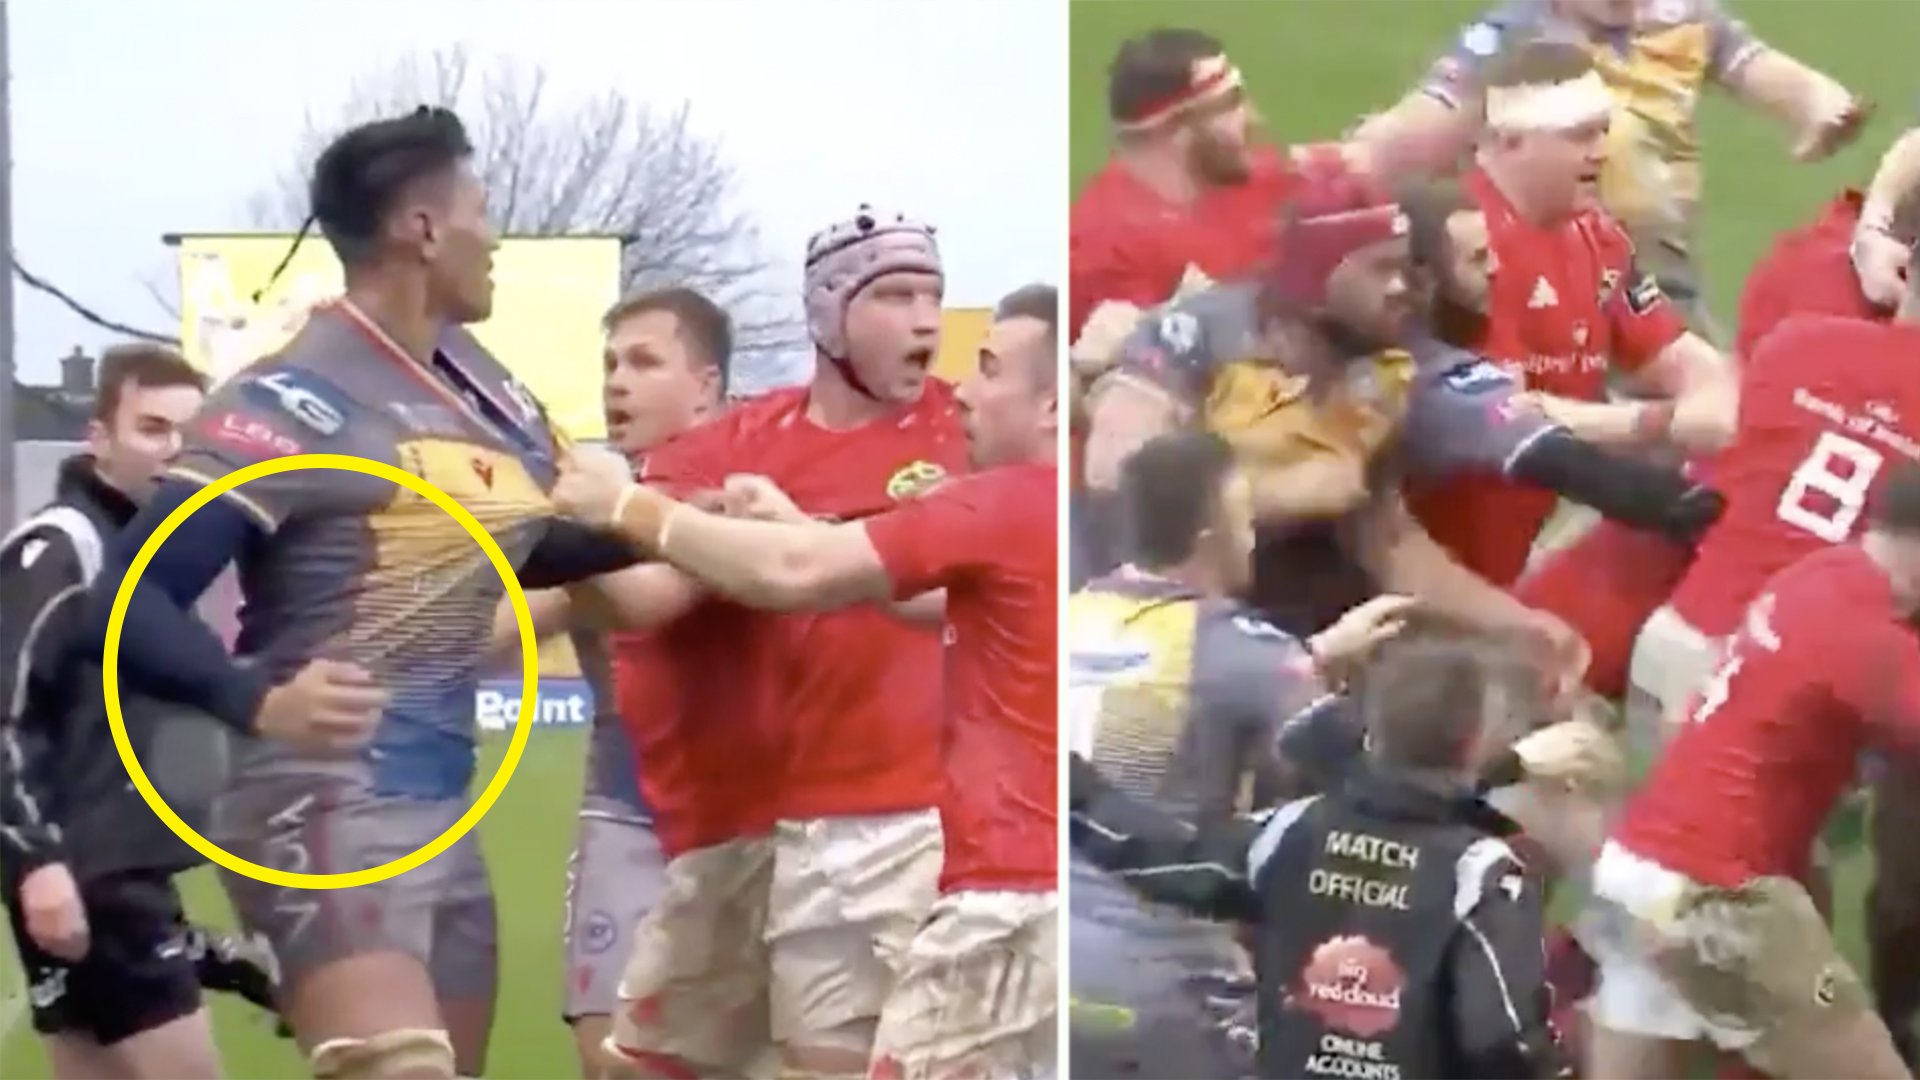 Rugby fans disgusted as player punches opposition twice in vicious attack